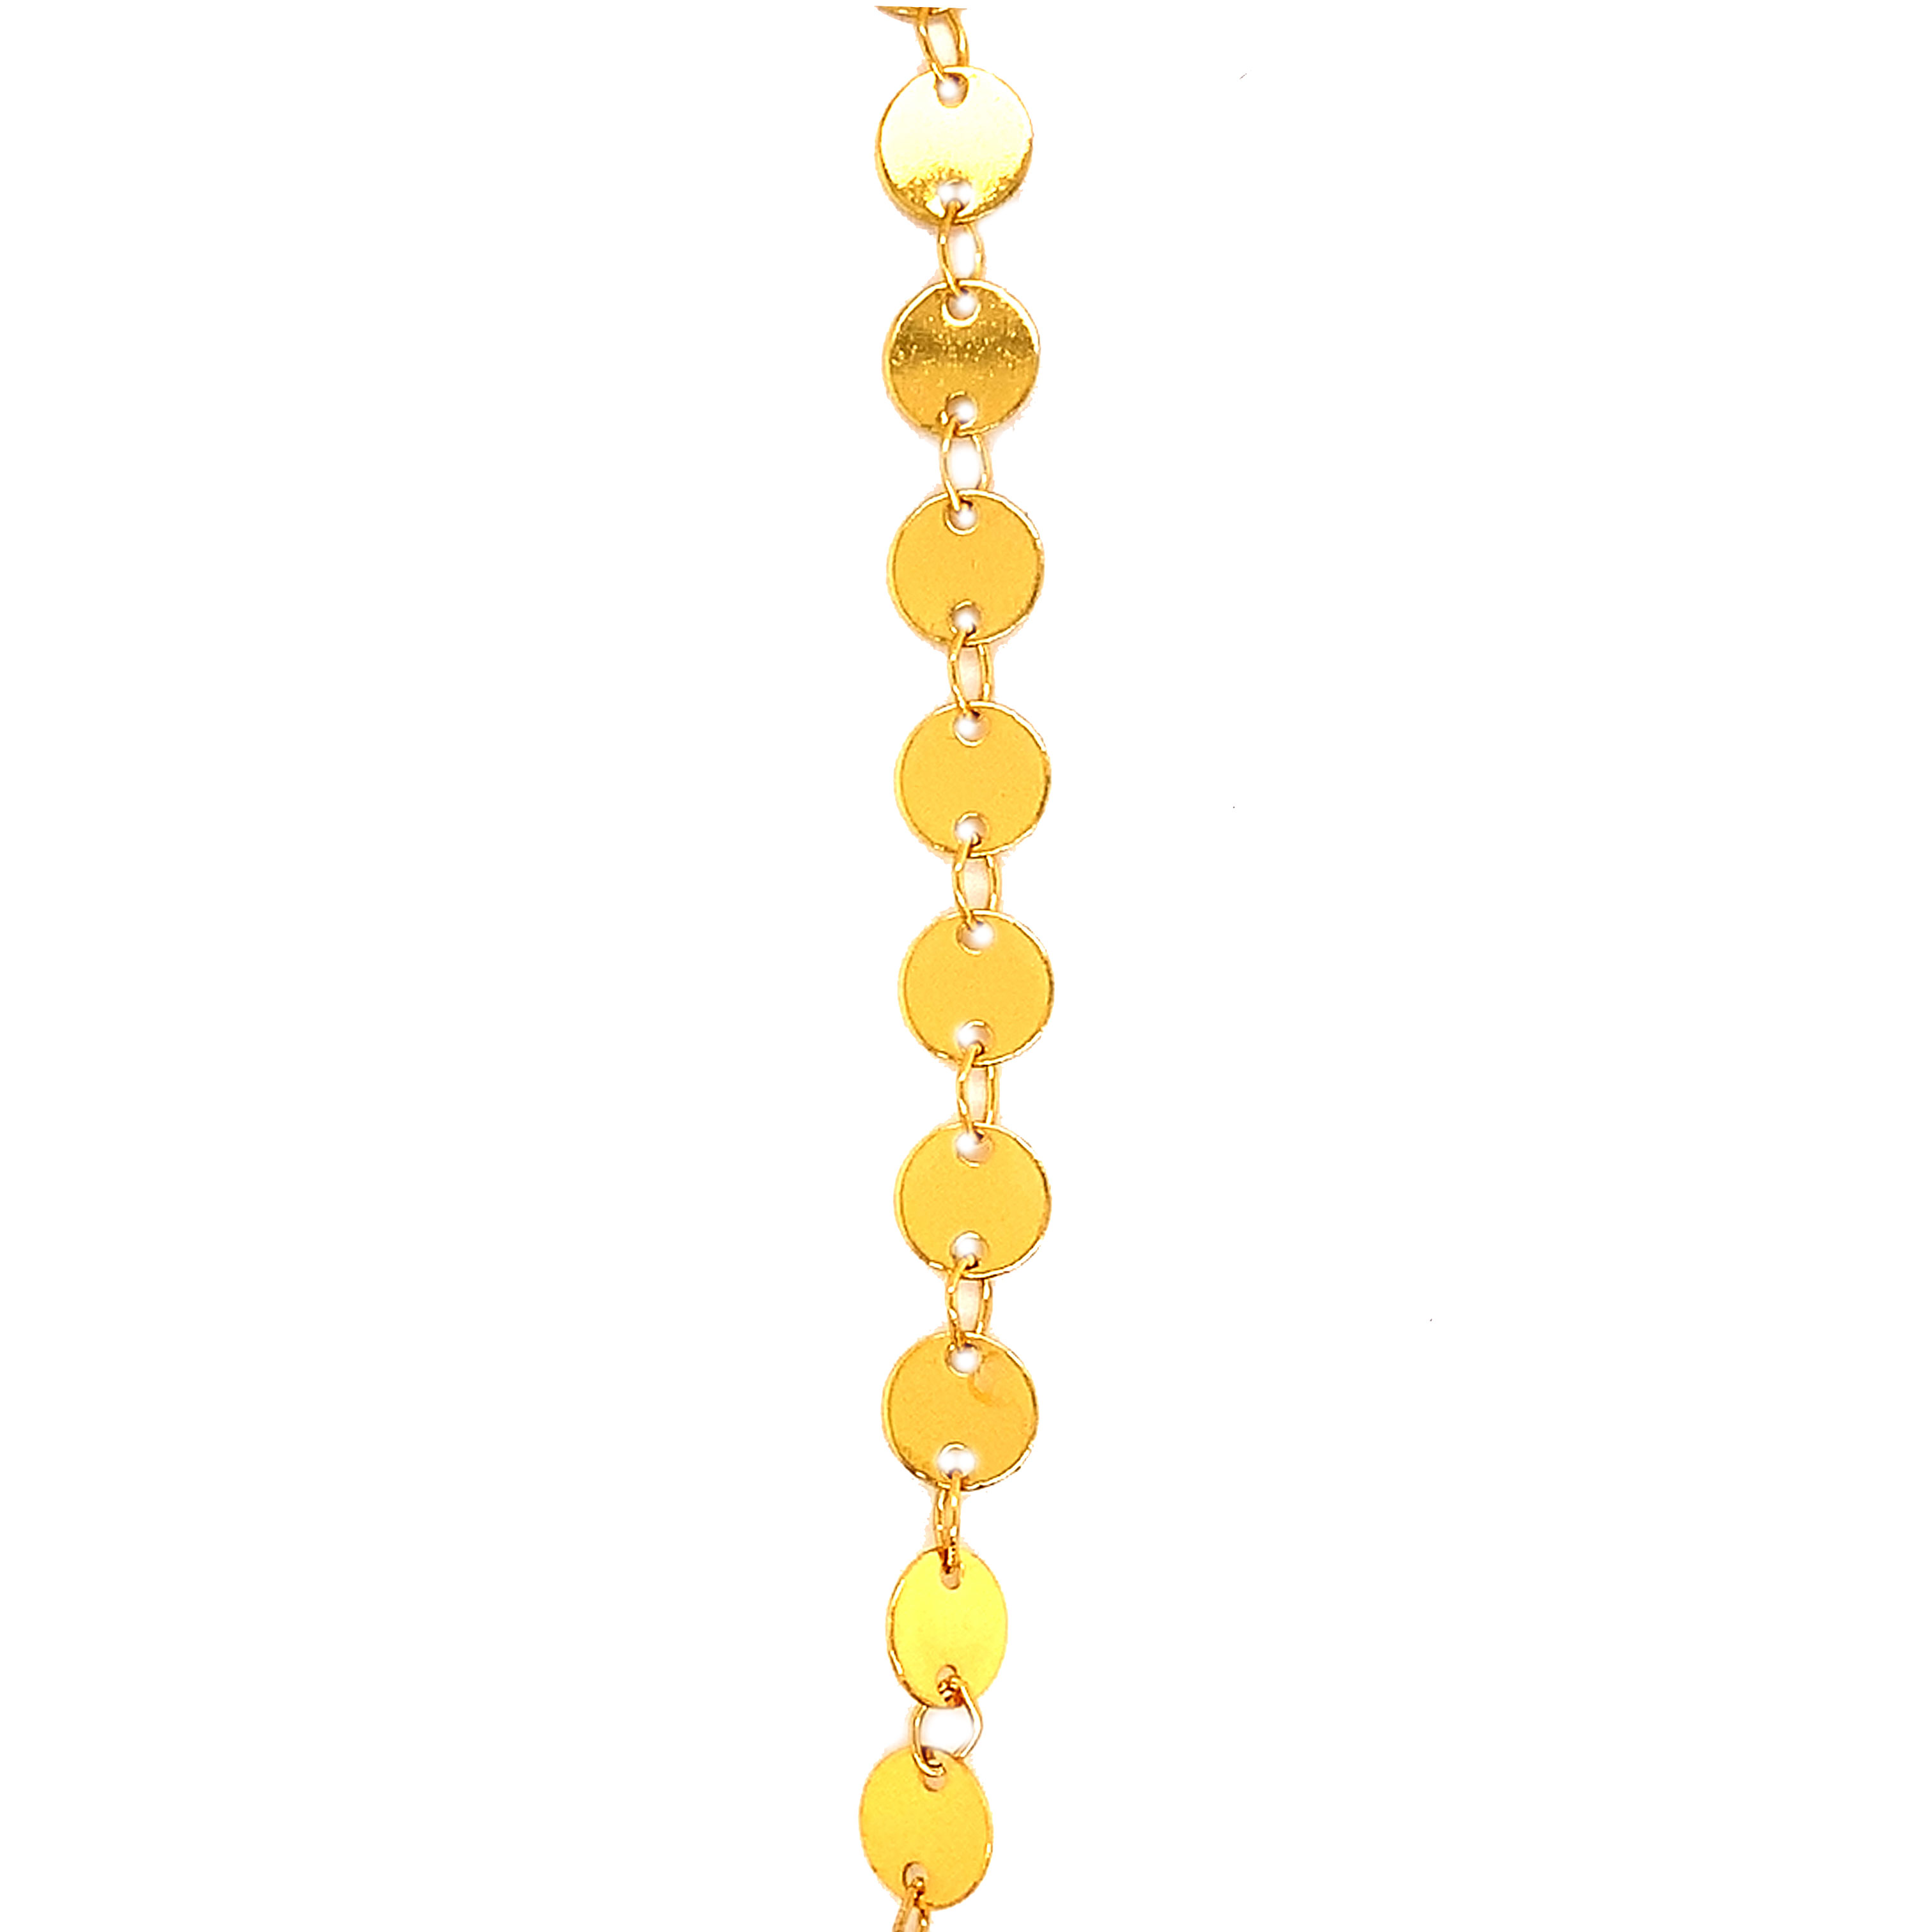 Disc Link Chain - Gold Plated - Price per foot